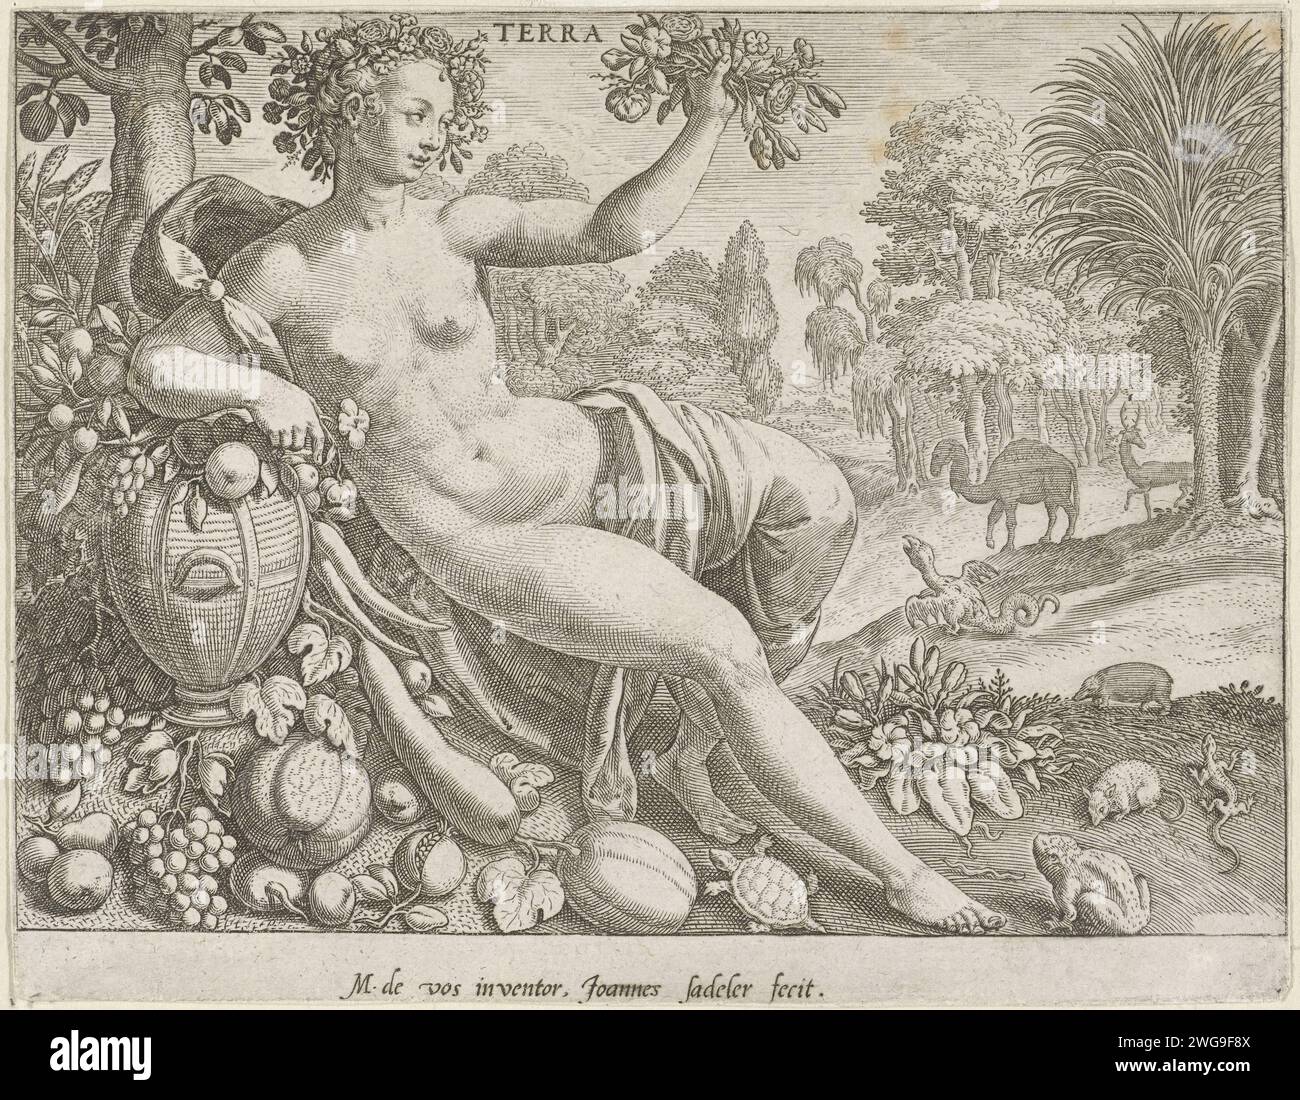 Earth, Johann Sadeler (I), After Maerten de Vos, 1560 - 1600 print The female personification of the Earth element. A flower wreath around her head. She sits under a tree, leaning on a vase with fruits. In the background a subtropical landscape with a palm tree and some animals, including a dragon and a dromedaris. The print is part of a series with the four elements the subject. unknown paper engraving 'Terra', 'Carro della terra' (Ripa). fruits. landscapes in tropical and sub-tropical regions. dragon. tailless amphibians: frog. hoofed animals: dromedary Stock Photo